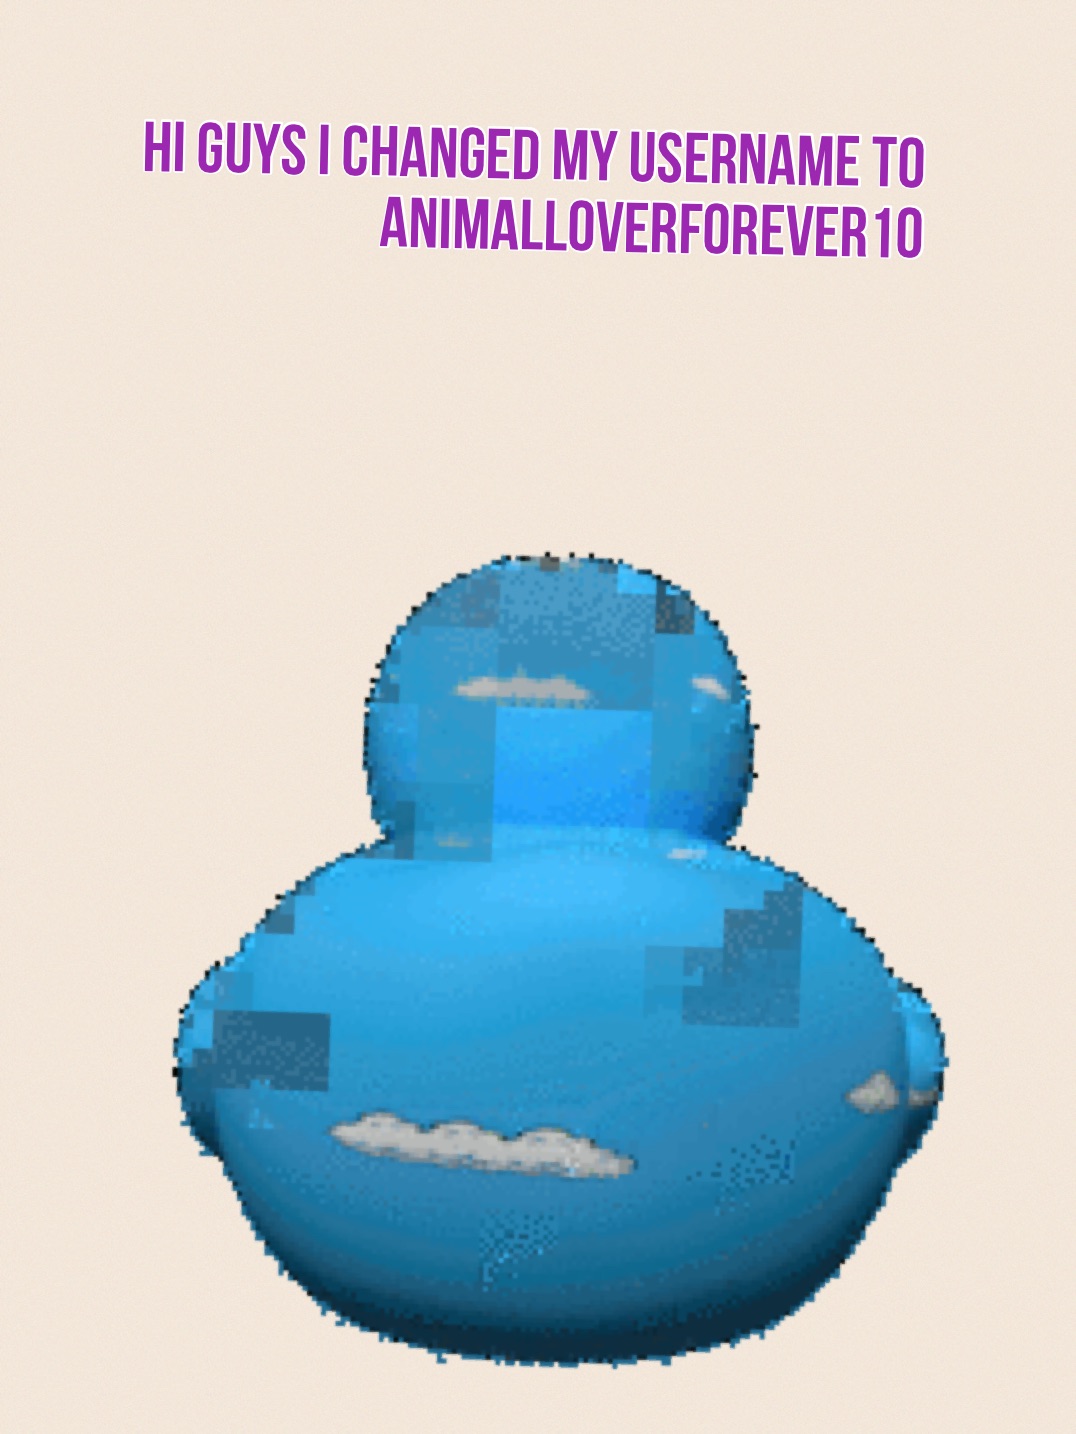 Hi guys I changed my username to animalloverforever10